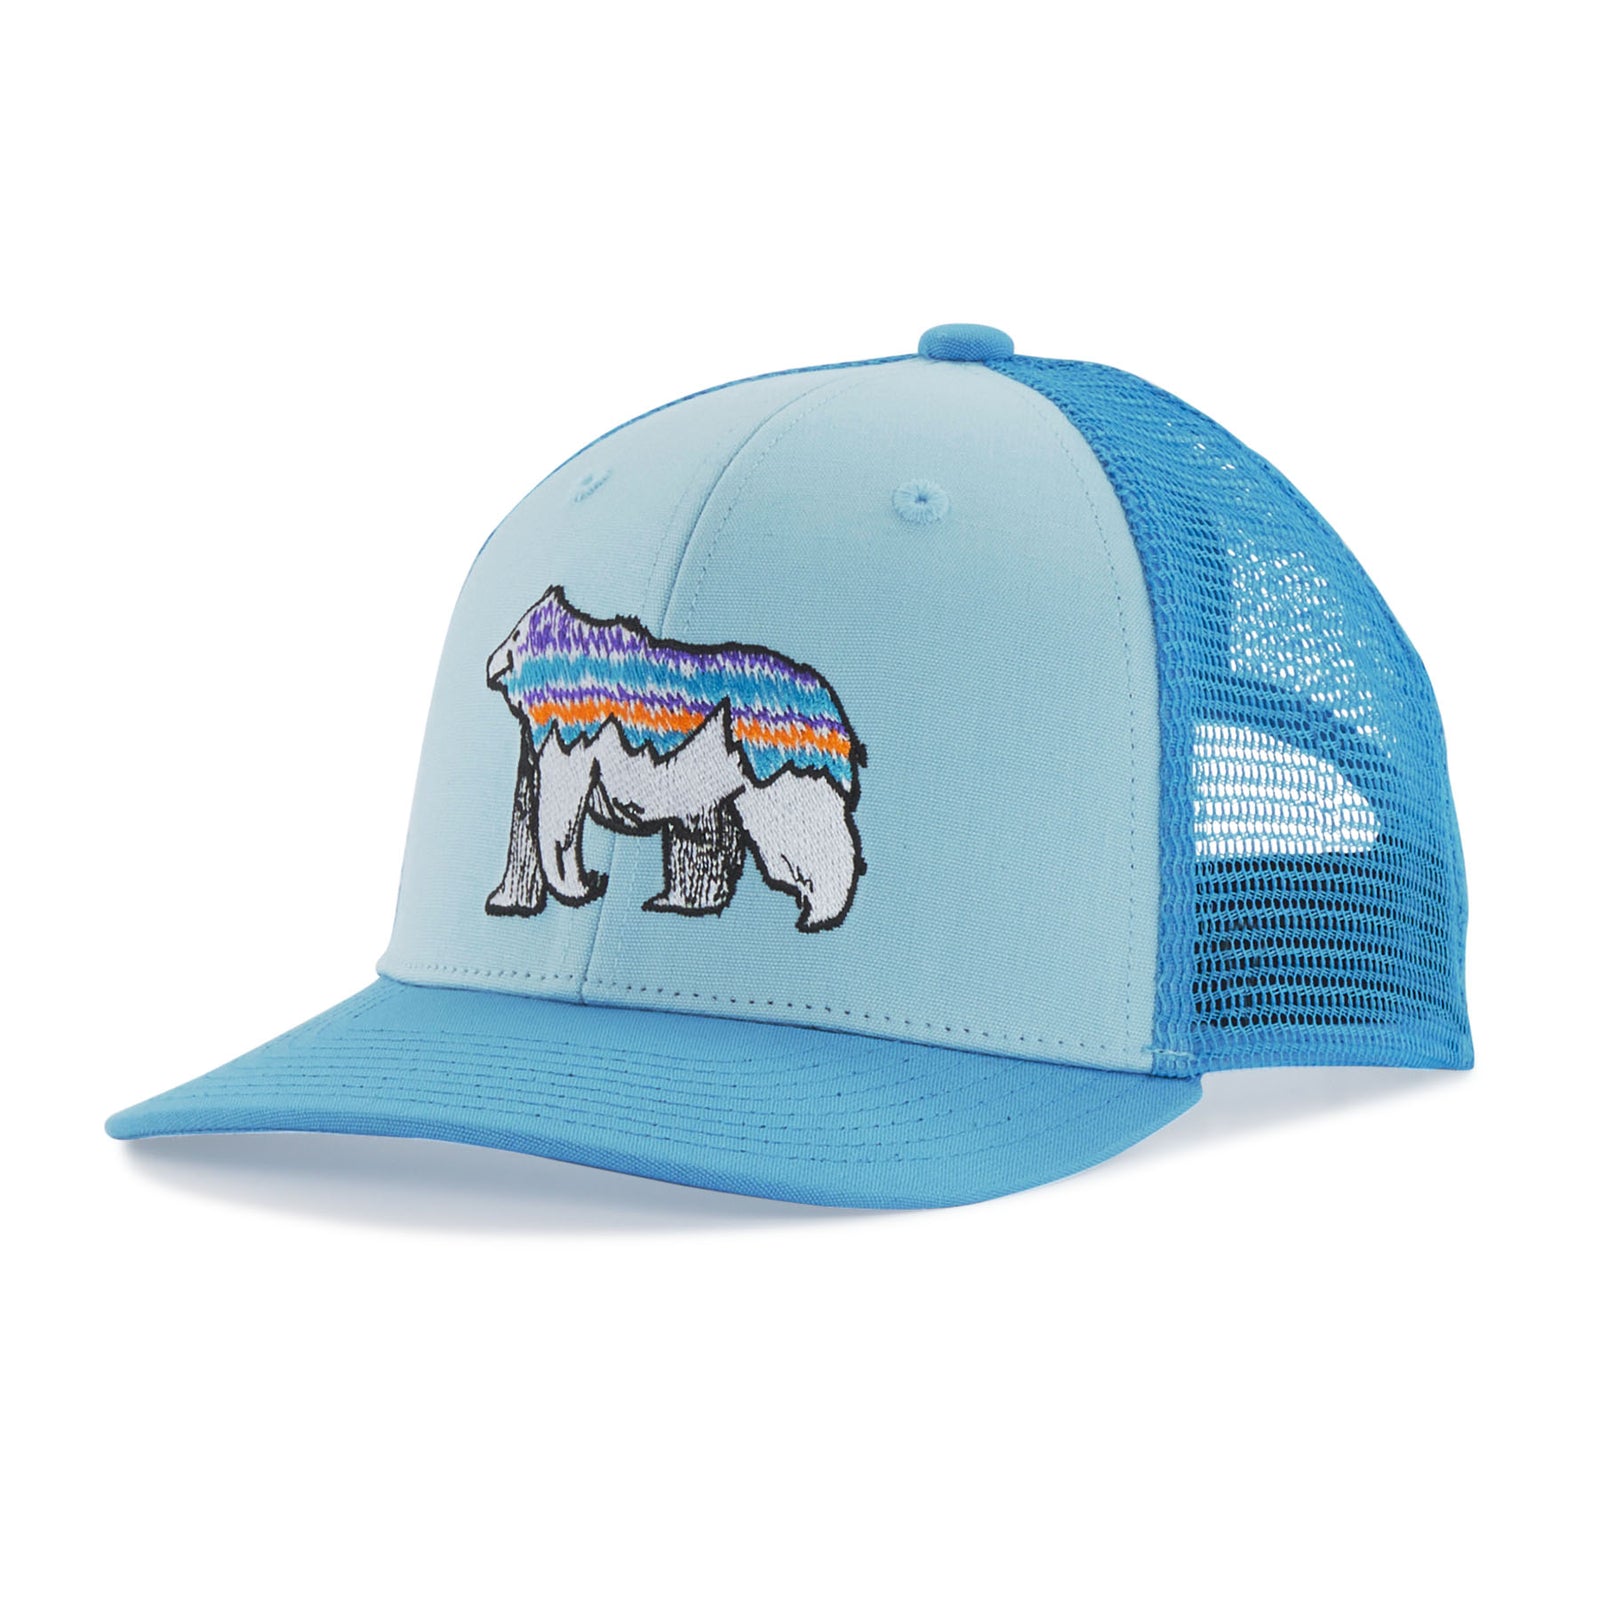 Mens Clothing Tagged Hats - Fin & Fire Fly Shop